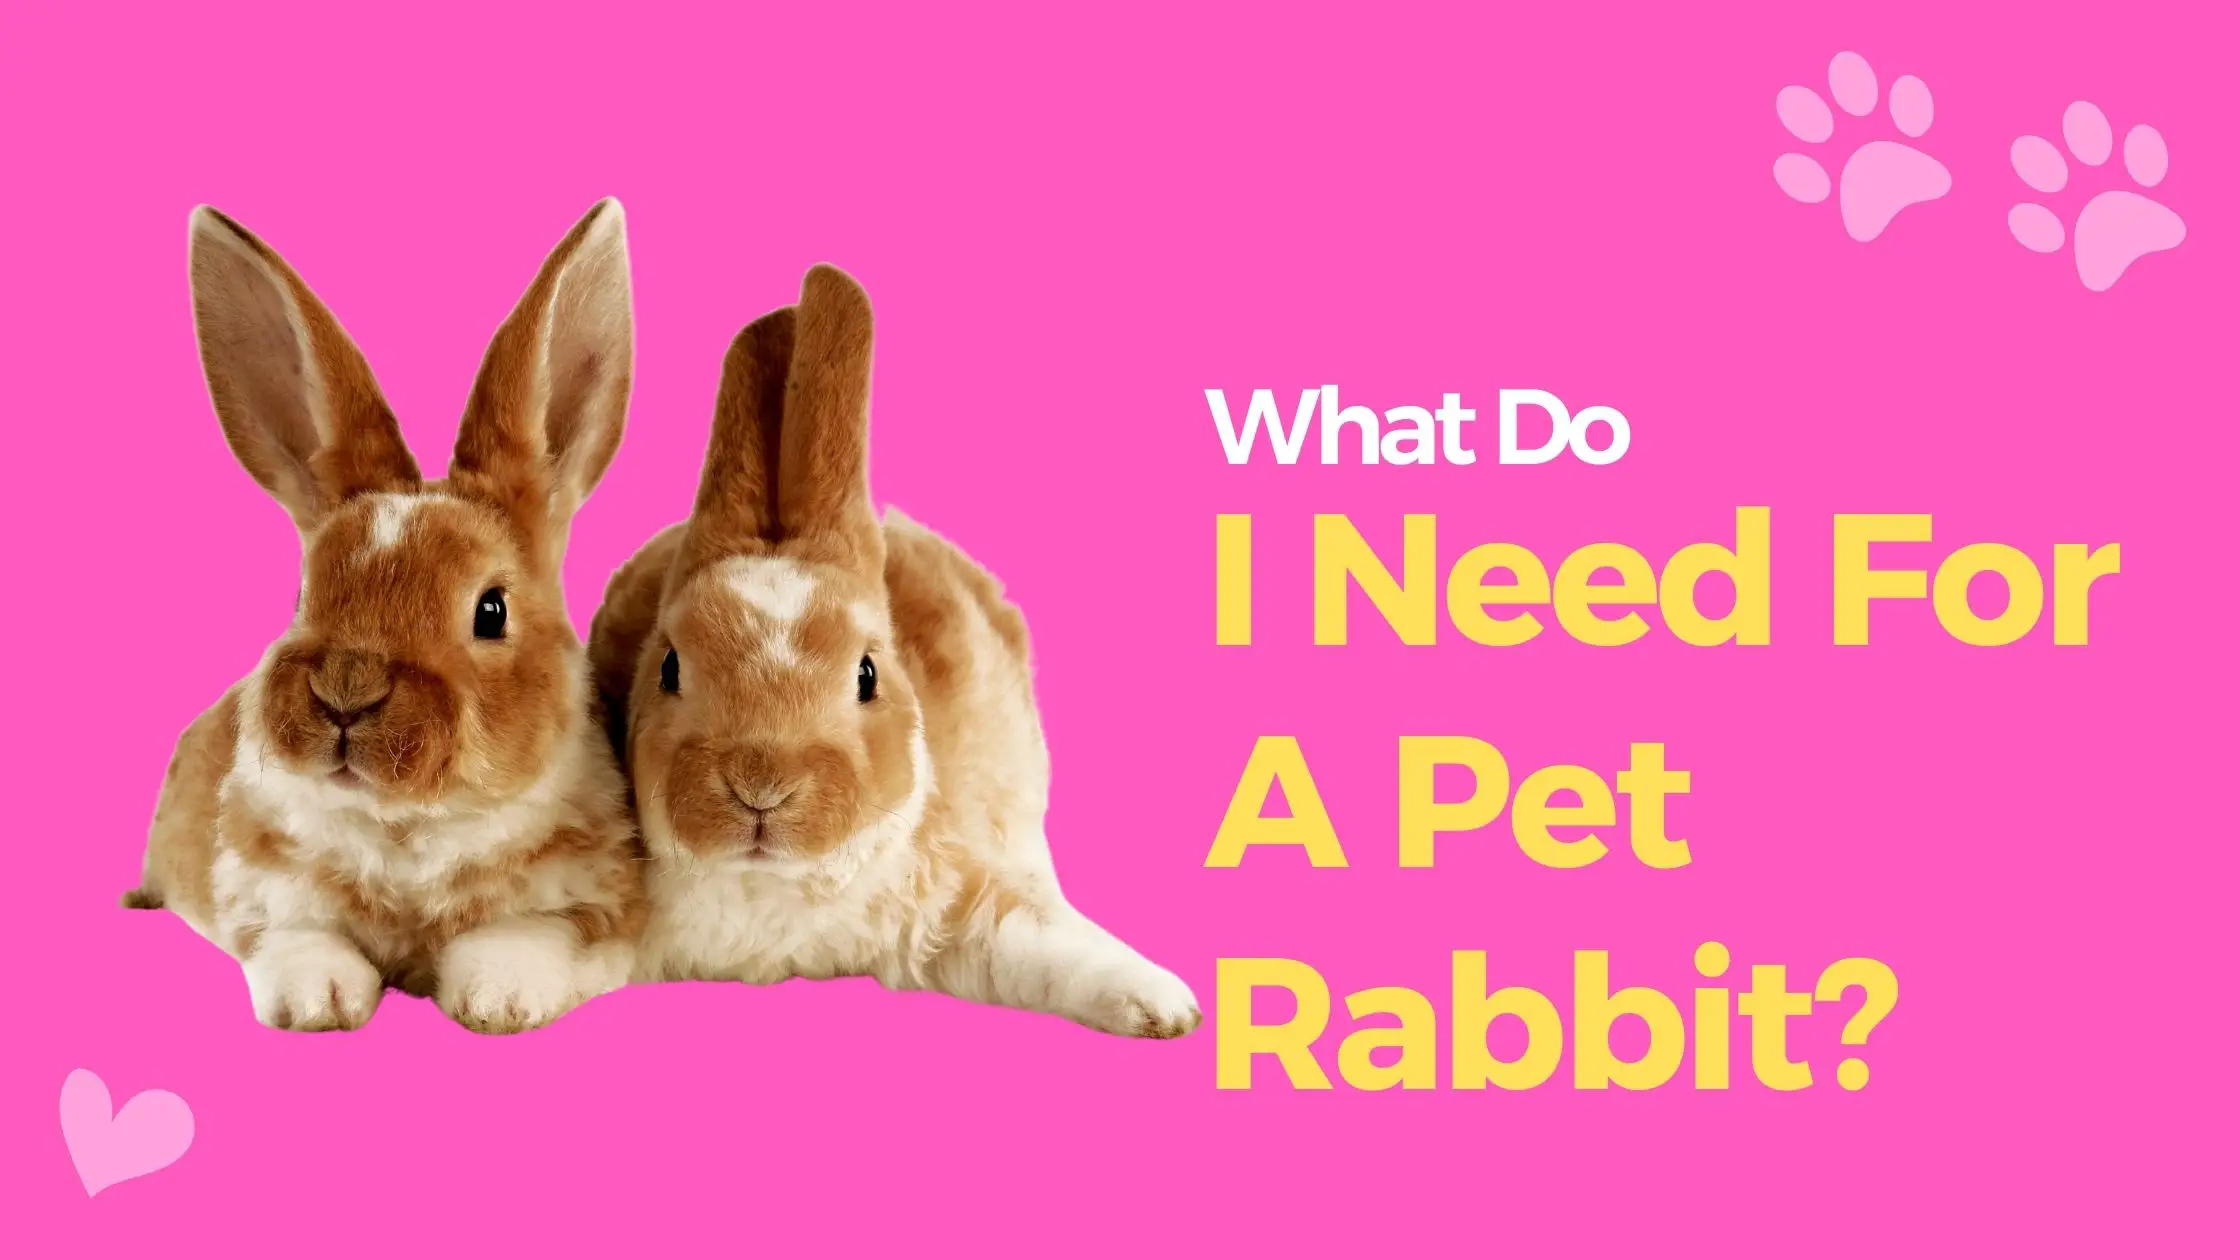 What Do I Need For A Pet Rabbit